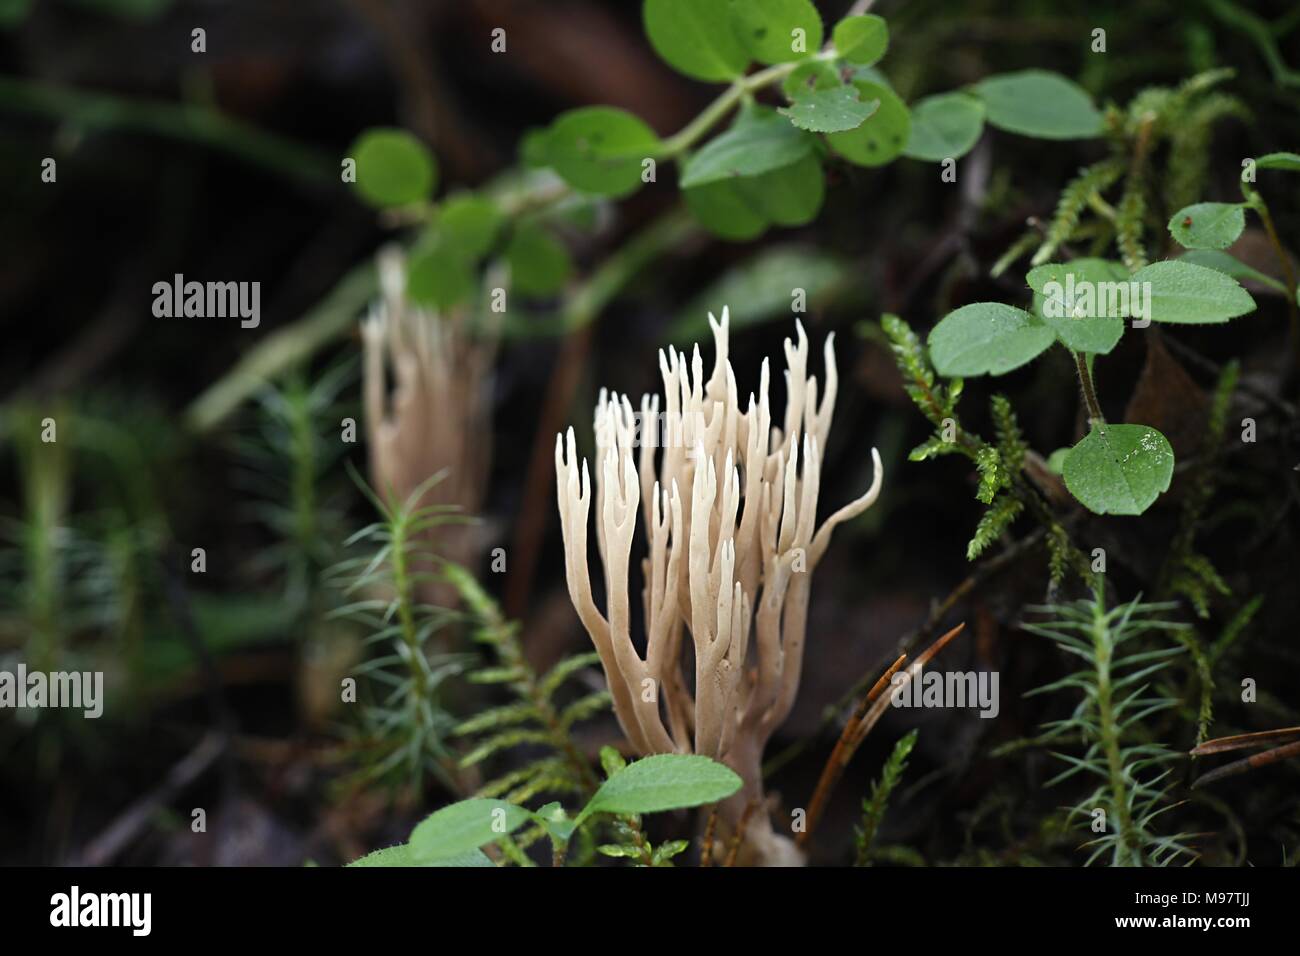 Ramaria apiculata, known as the Green-tipped Coral Fungus, wild mushroom from Finland Stock Photo